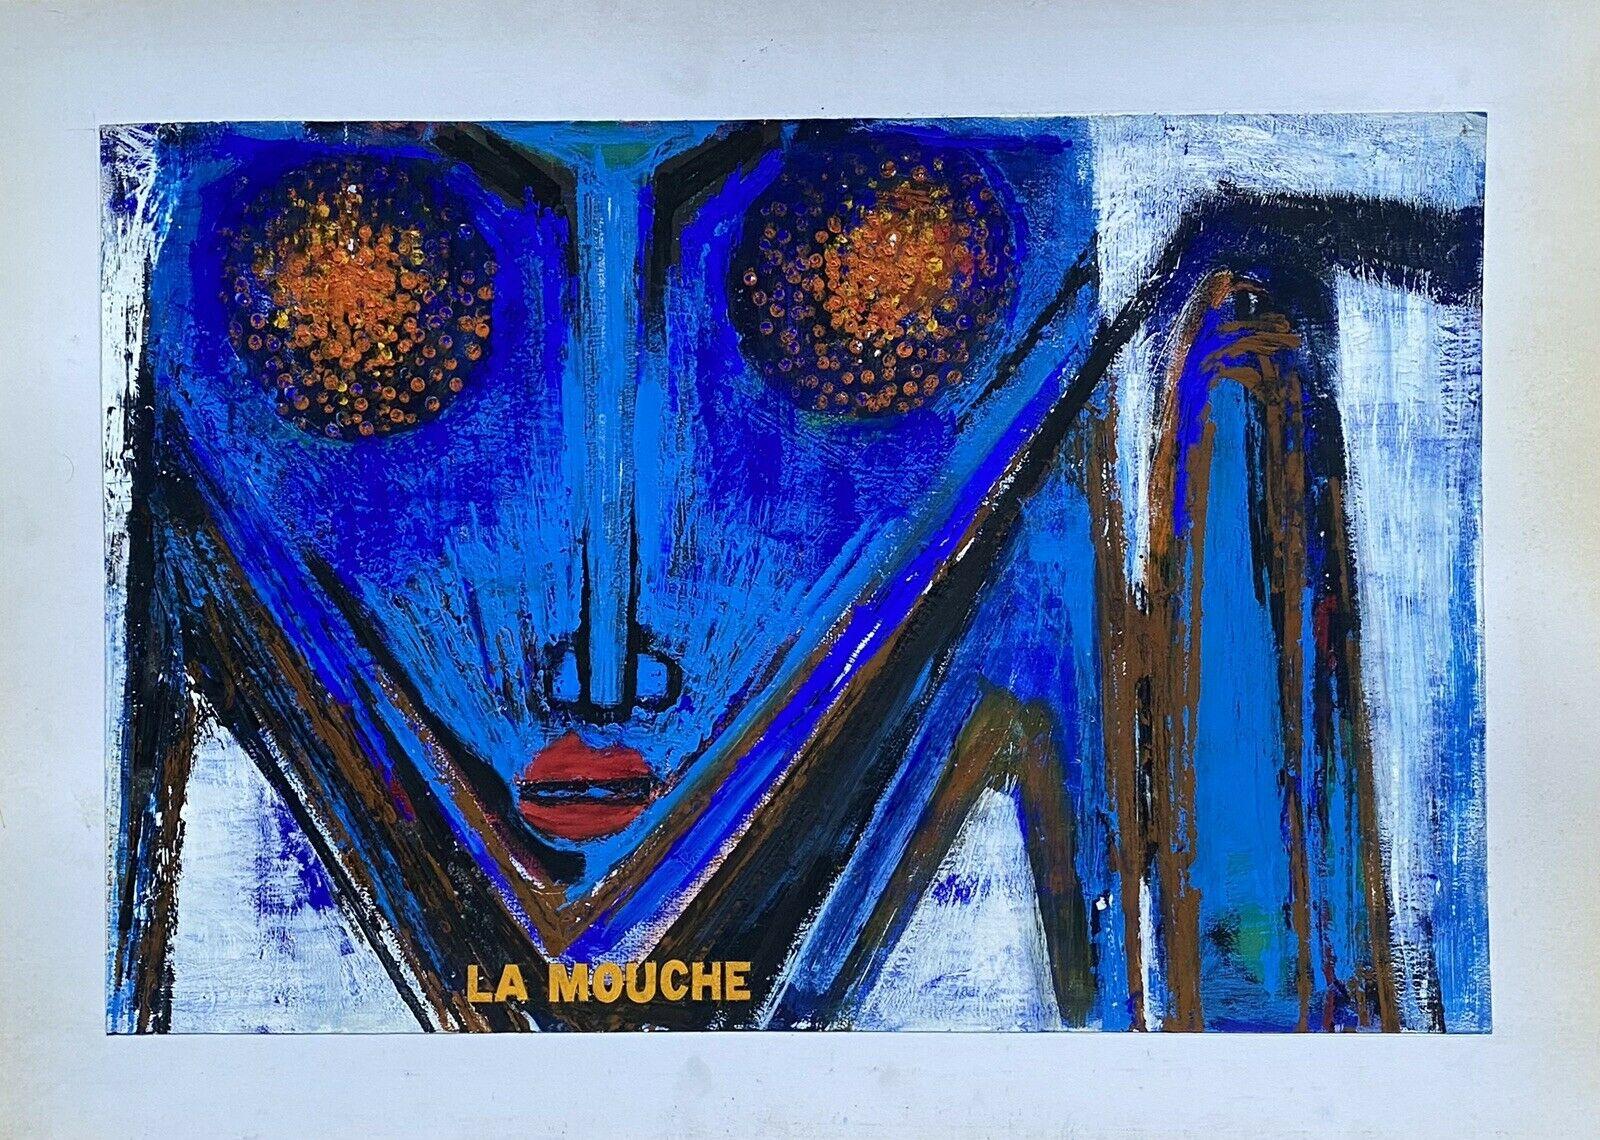 CLAUDE LAGOUCHE (1943-2020) ORIGNAL 1970'S FRENCH PSYCHEDELIC ABSTRACT PAINTING - Painting by Claude Lagouche